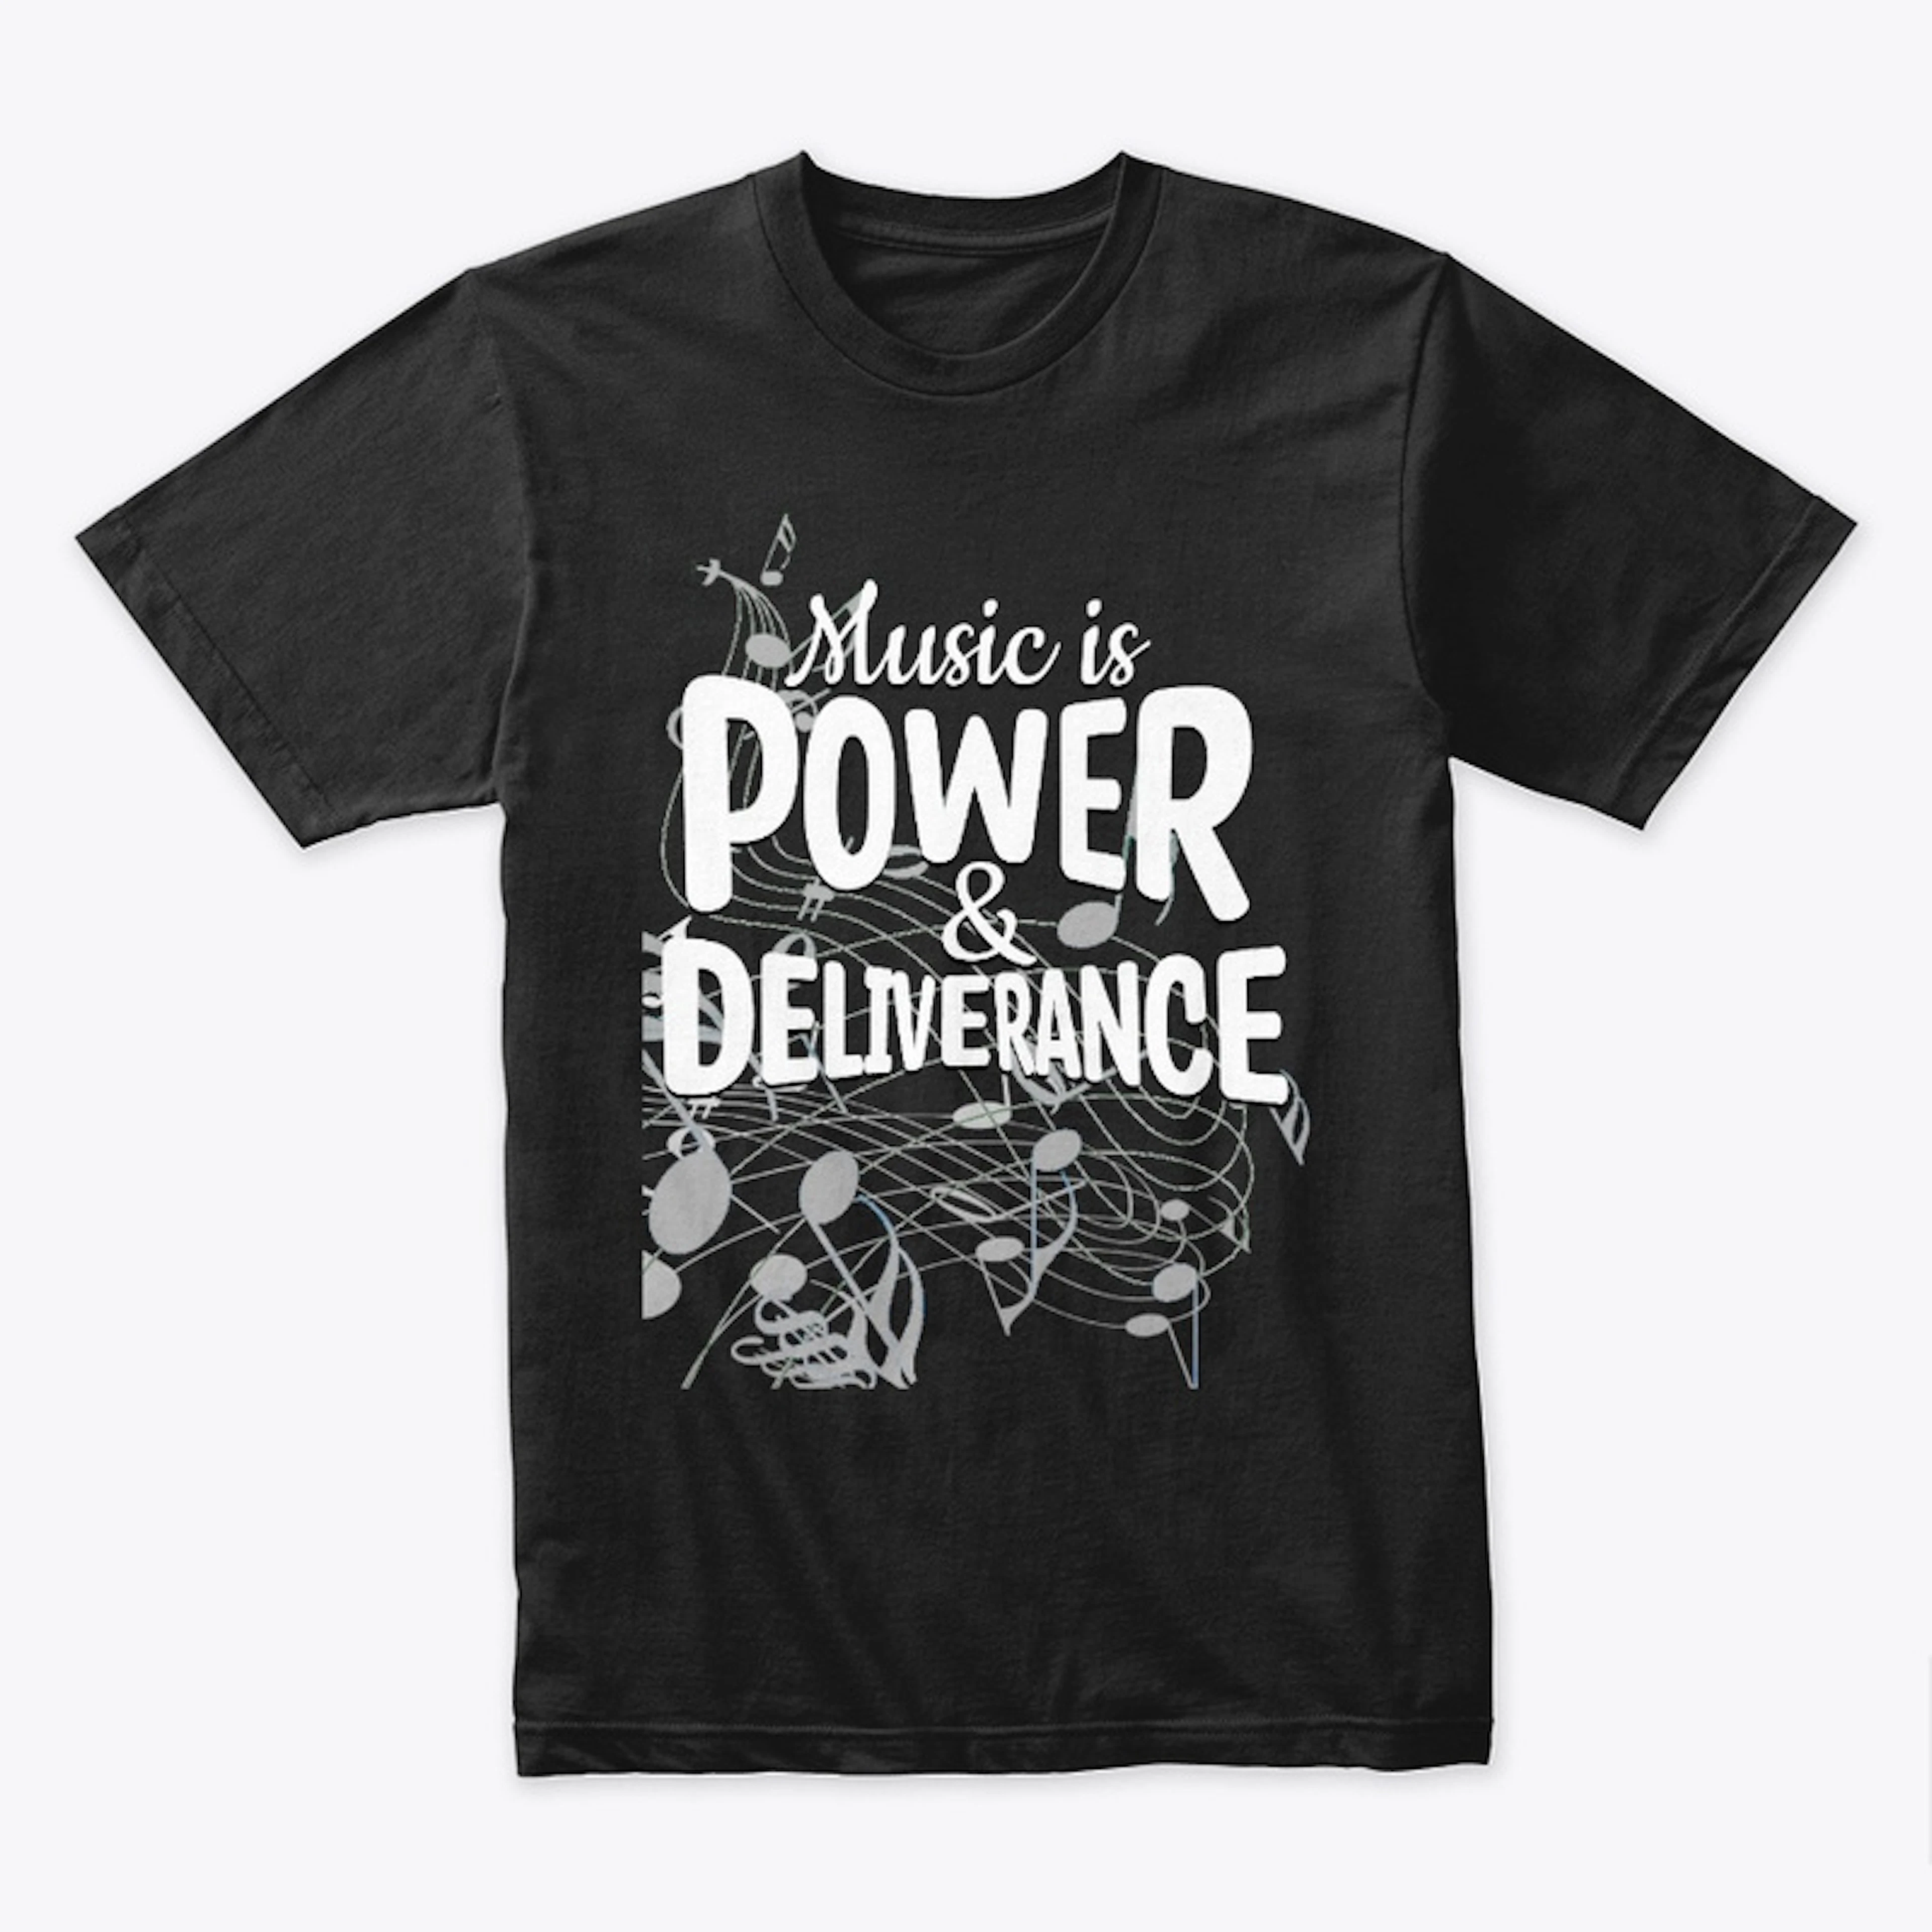 Music is Power & Deliverance (Music Art)